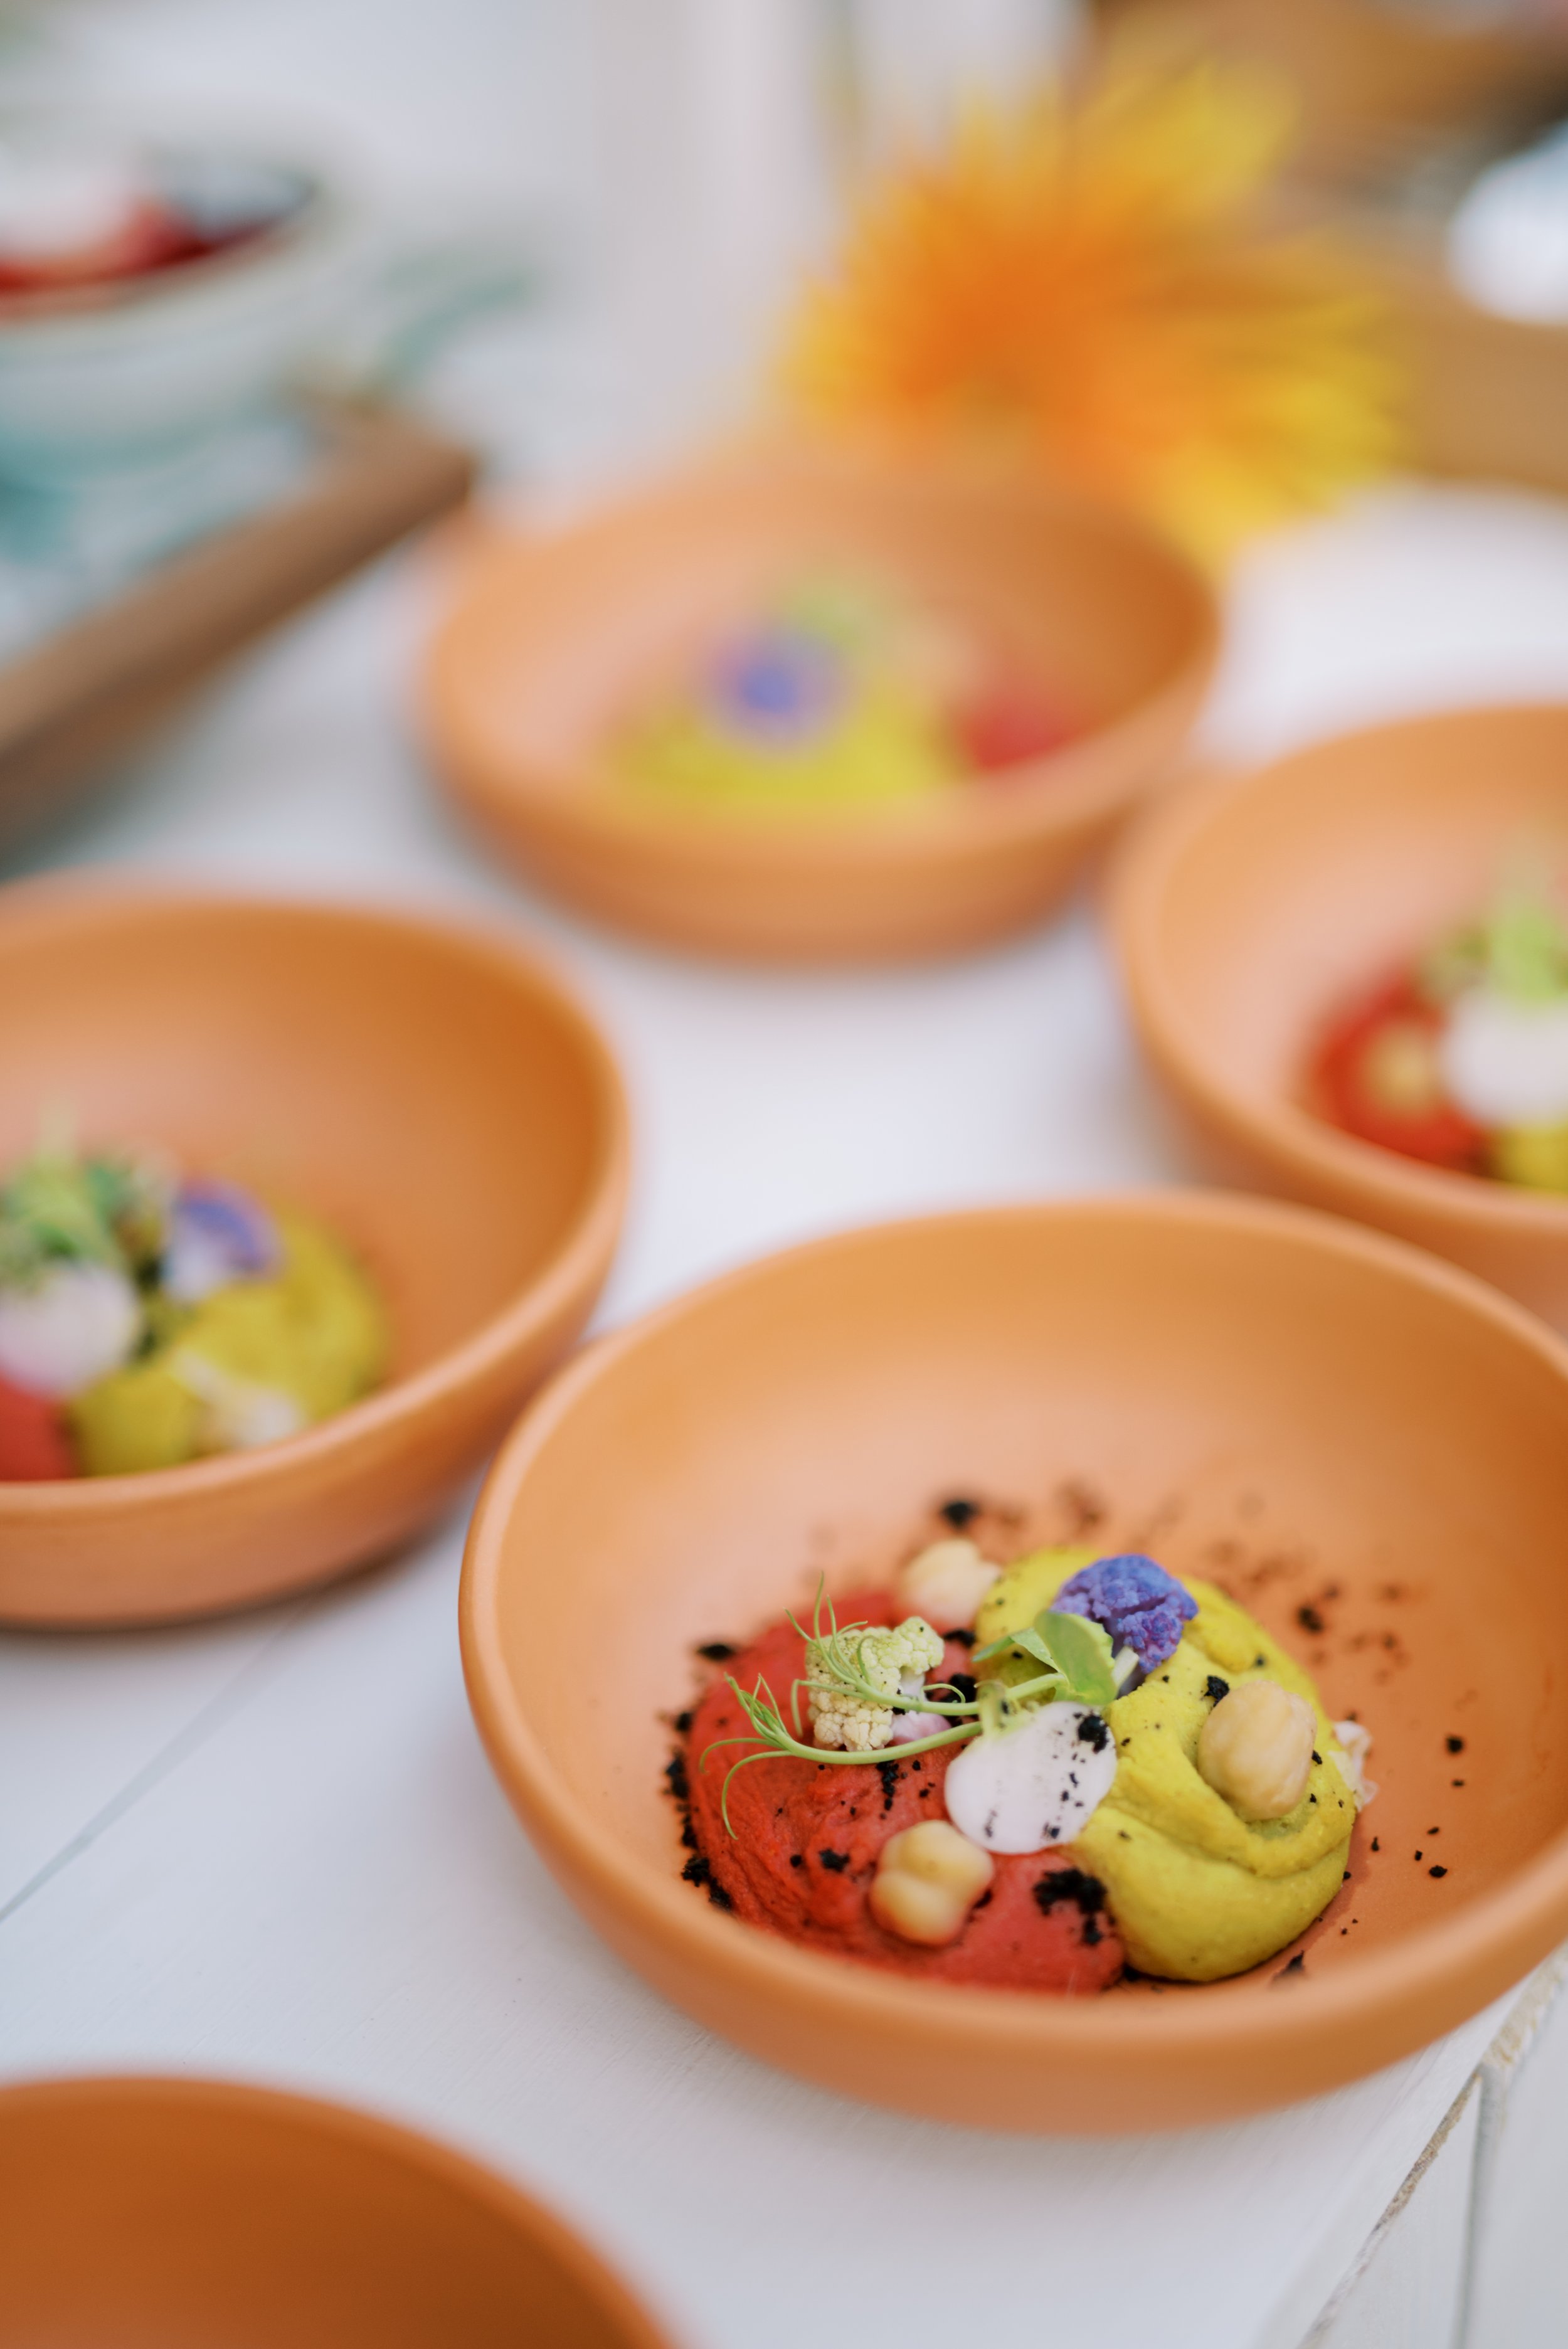 Image showing small bowls of appetiser nicely decorated